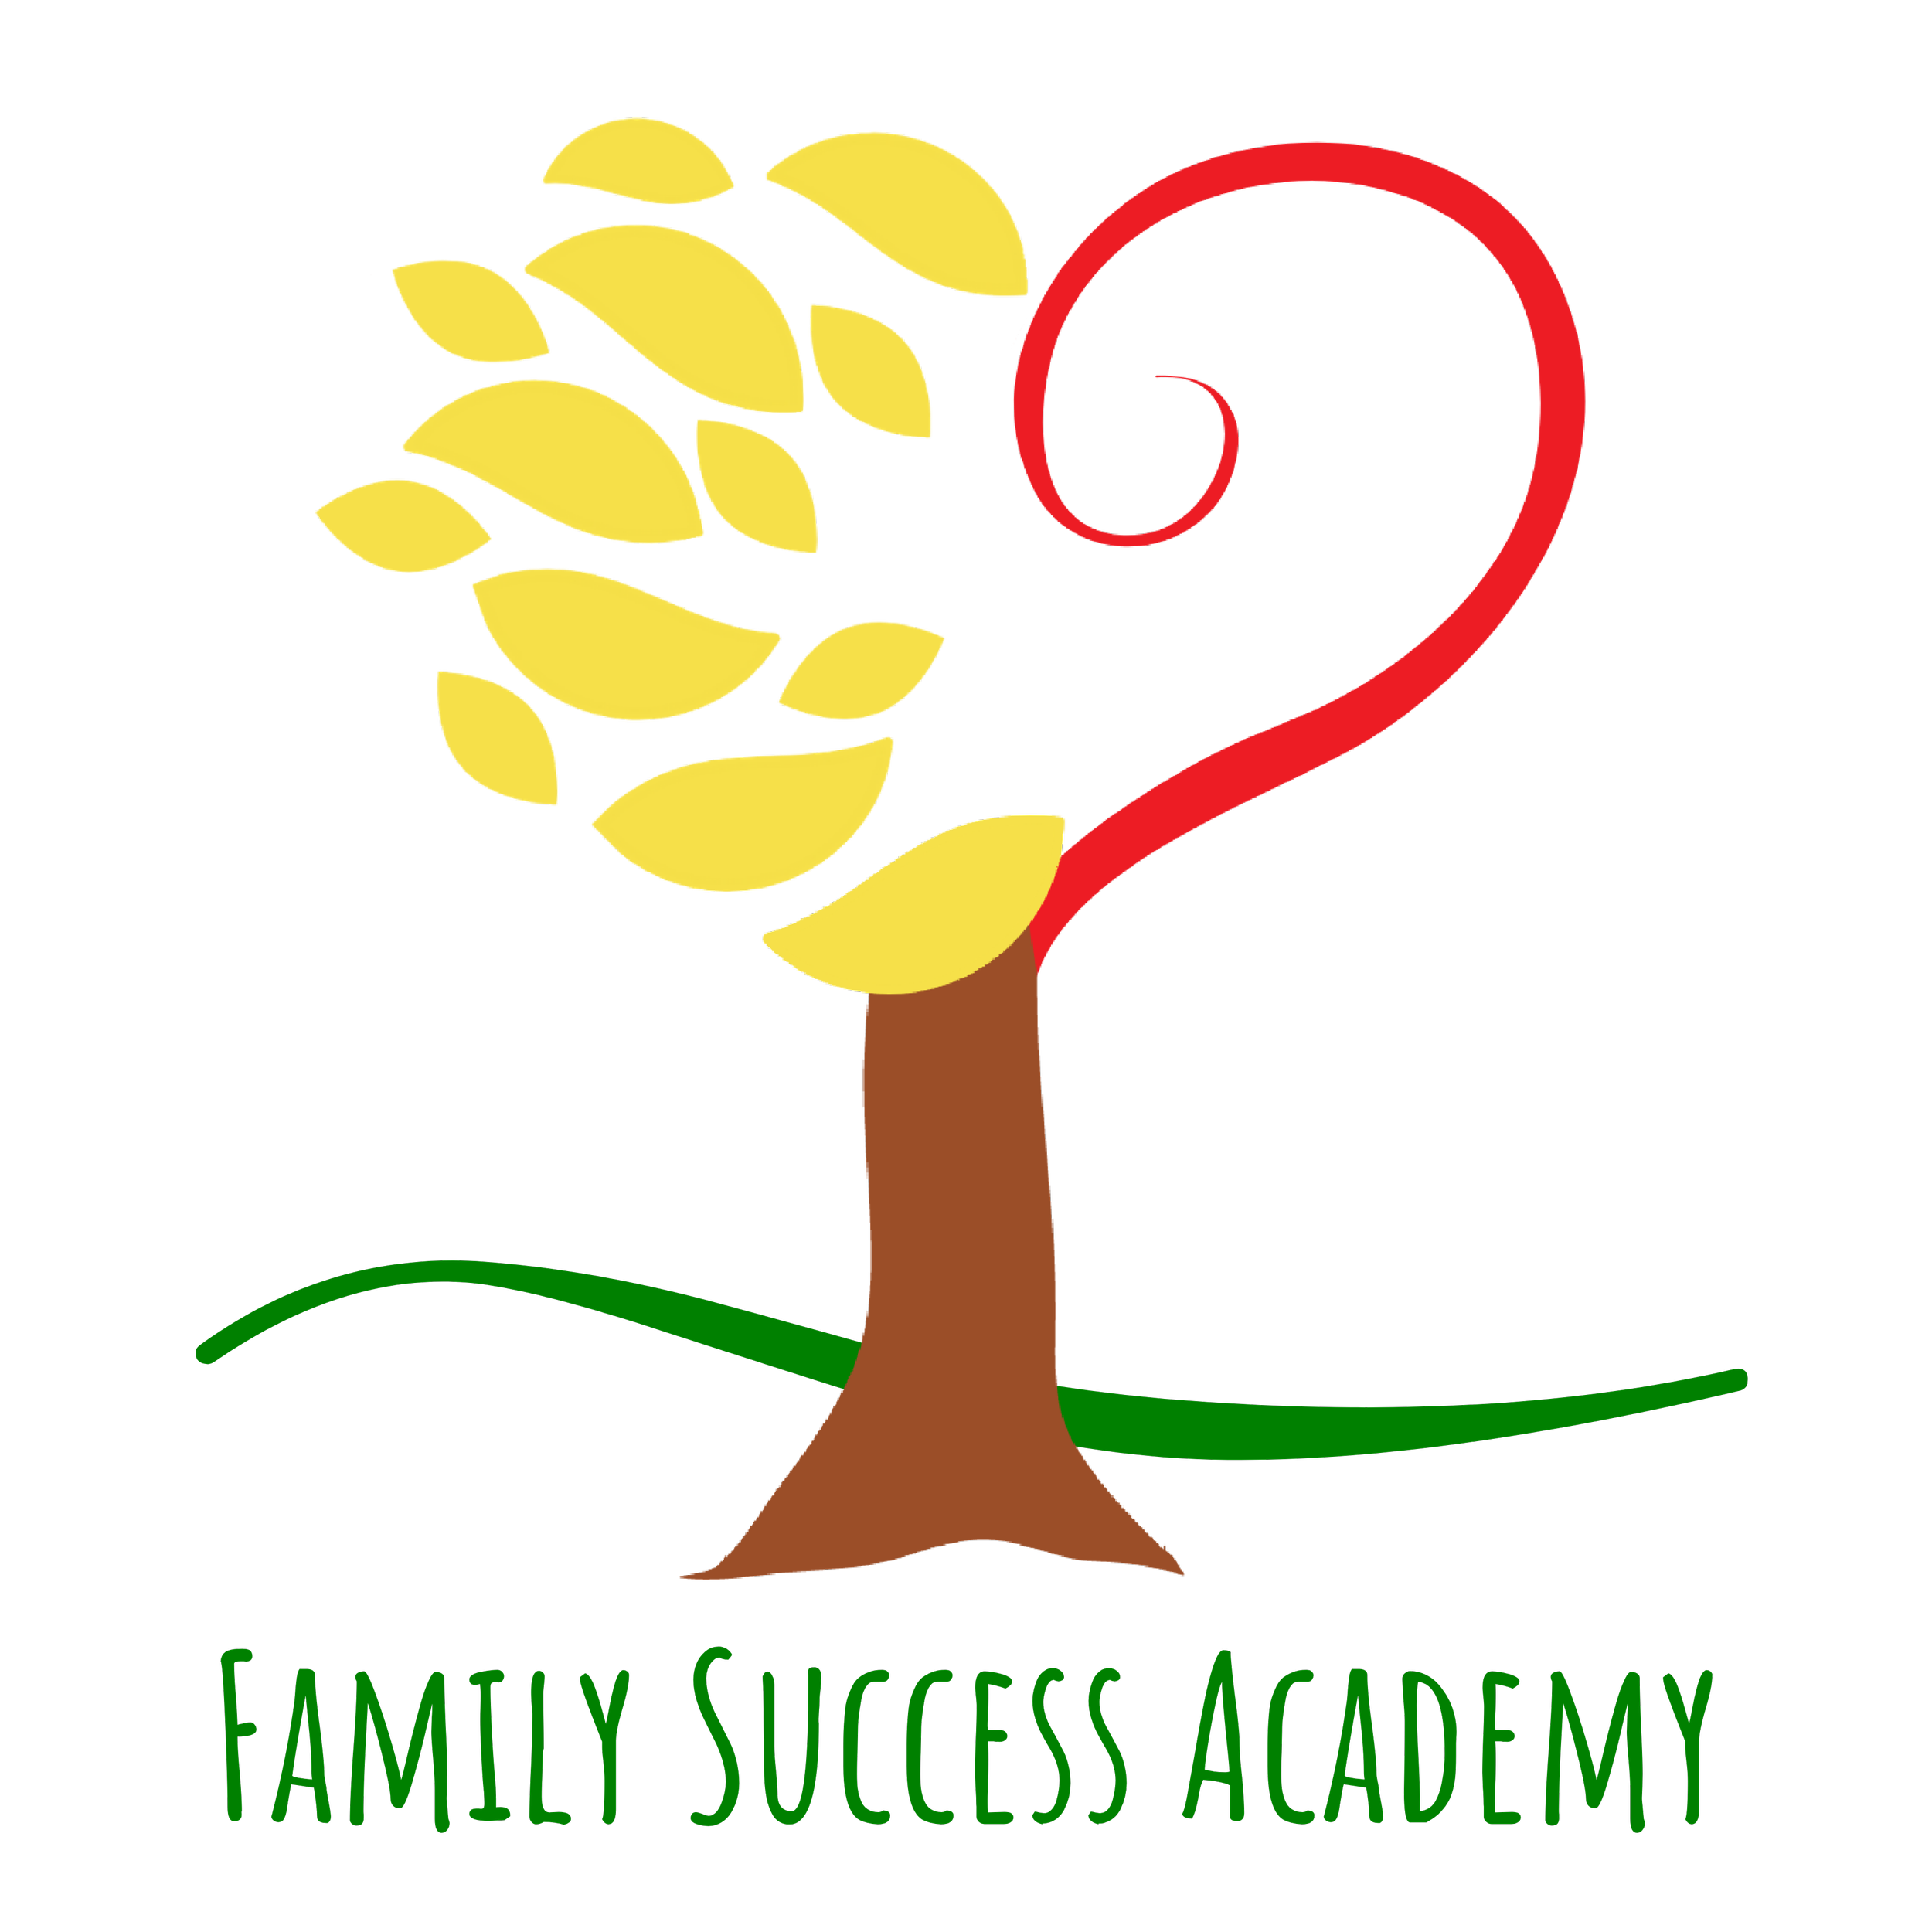 Family Success Academy Logo Tree  Name.png